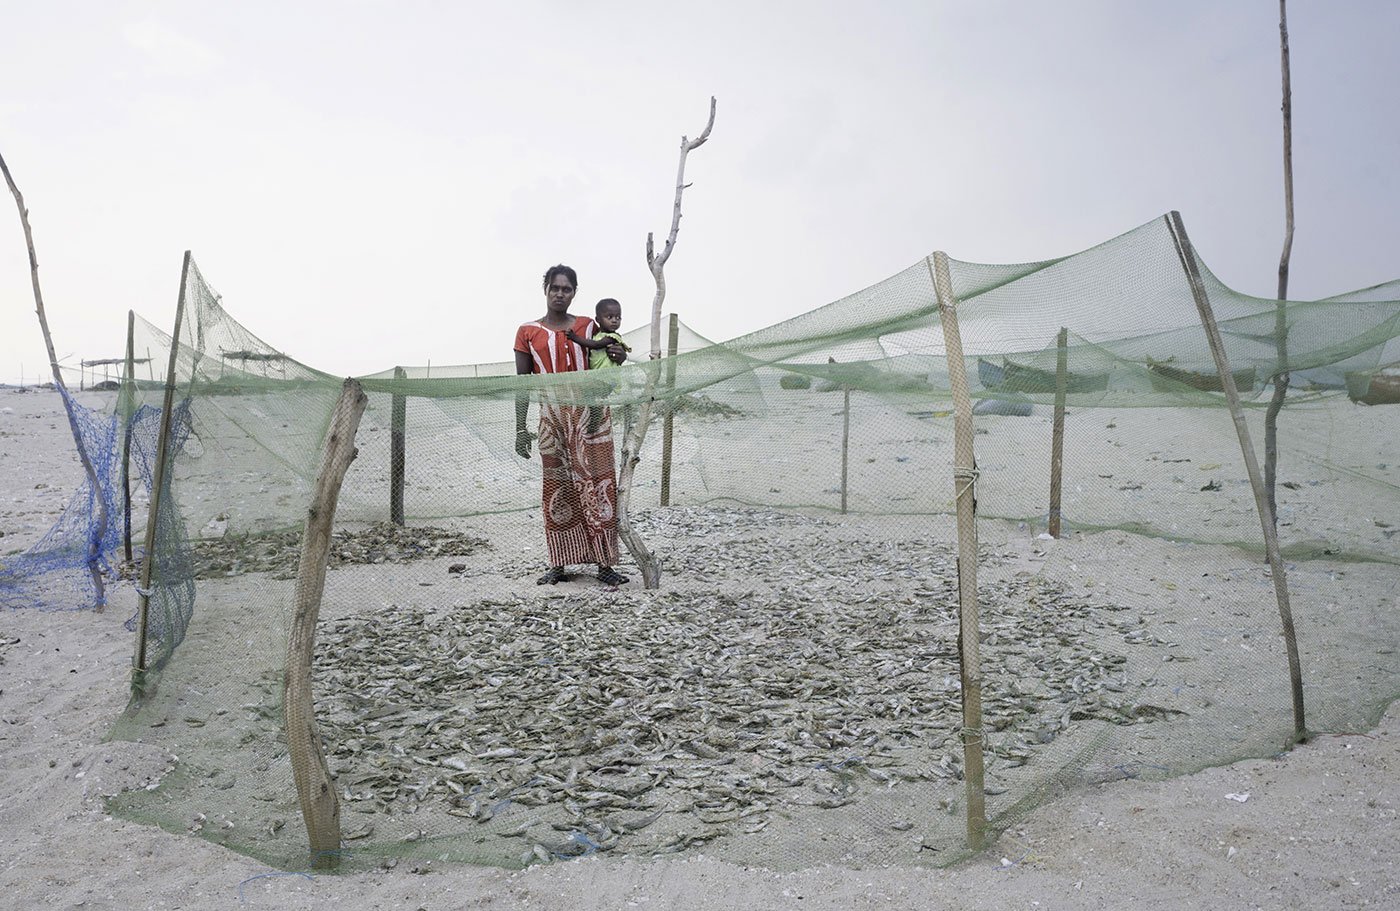 Woman with baby standing behind fishing nets used for drying fish